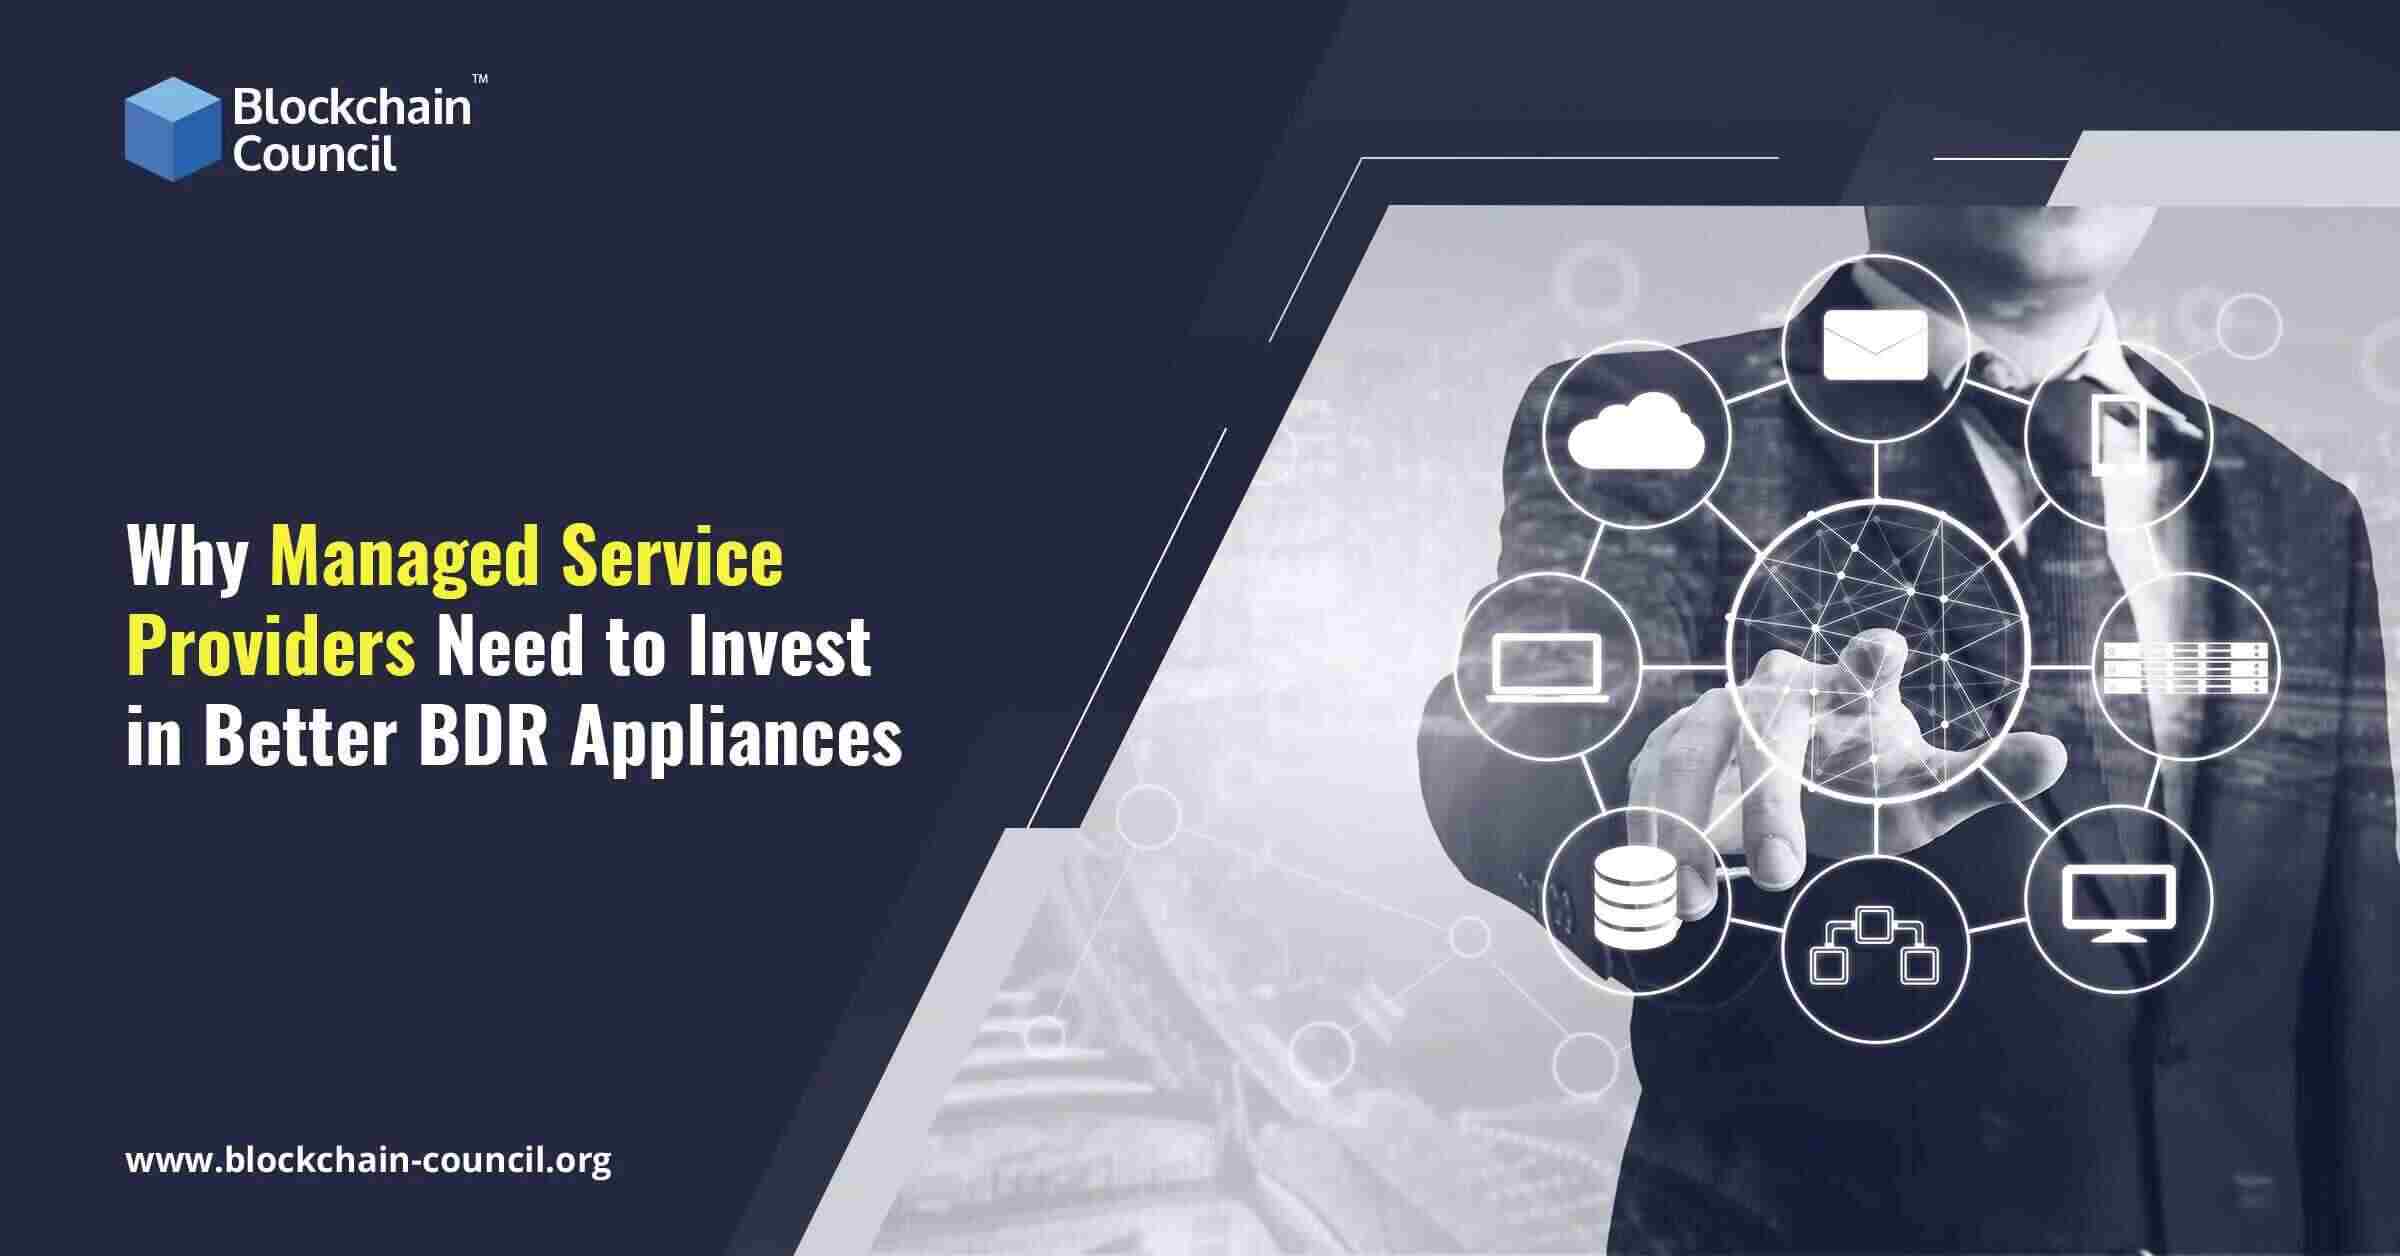 Why Managed Service Providers Need to Invest in Better BDR Appliances